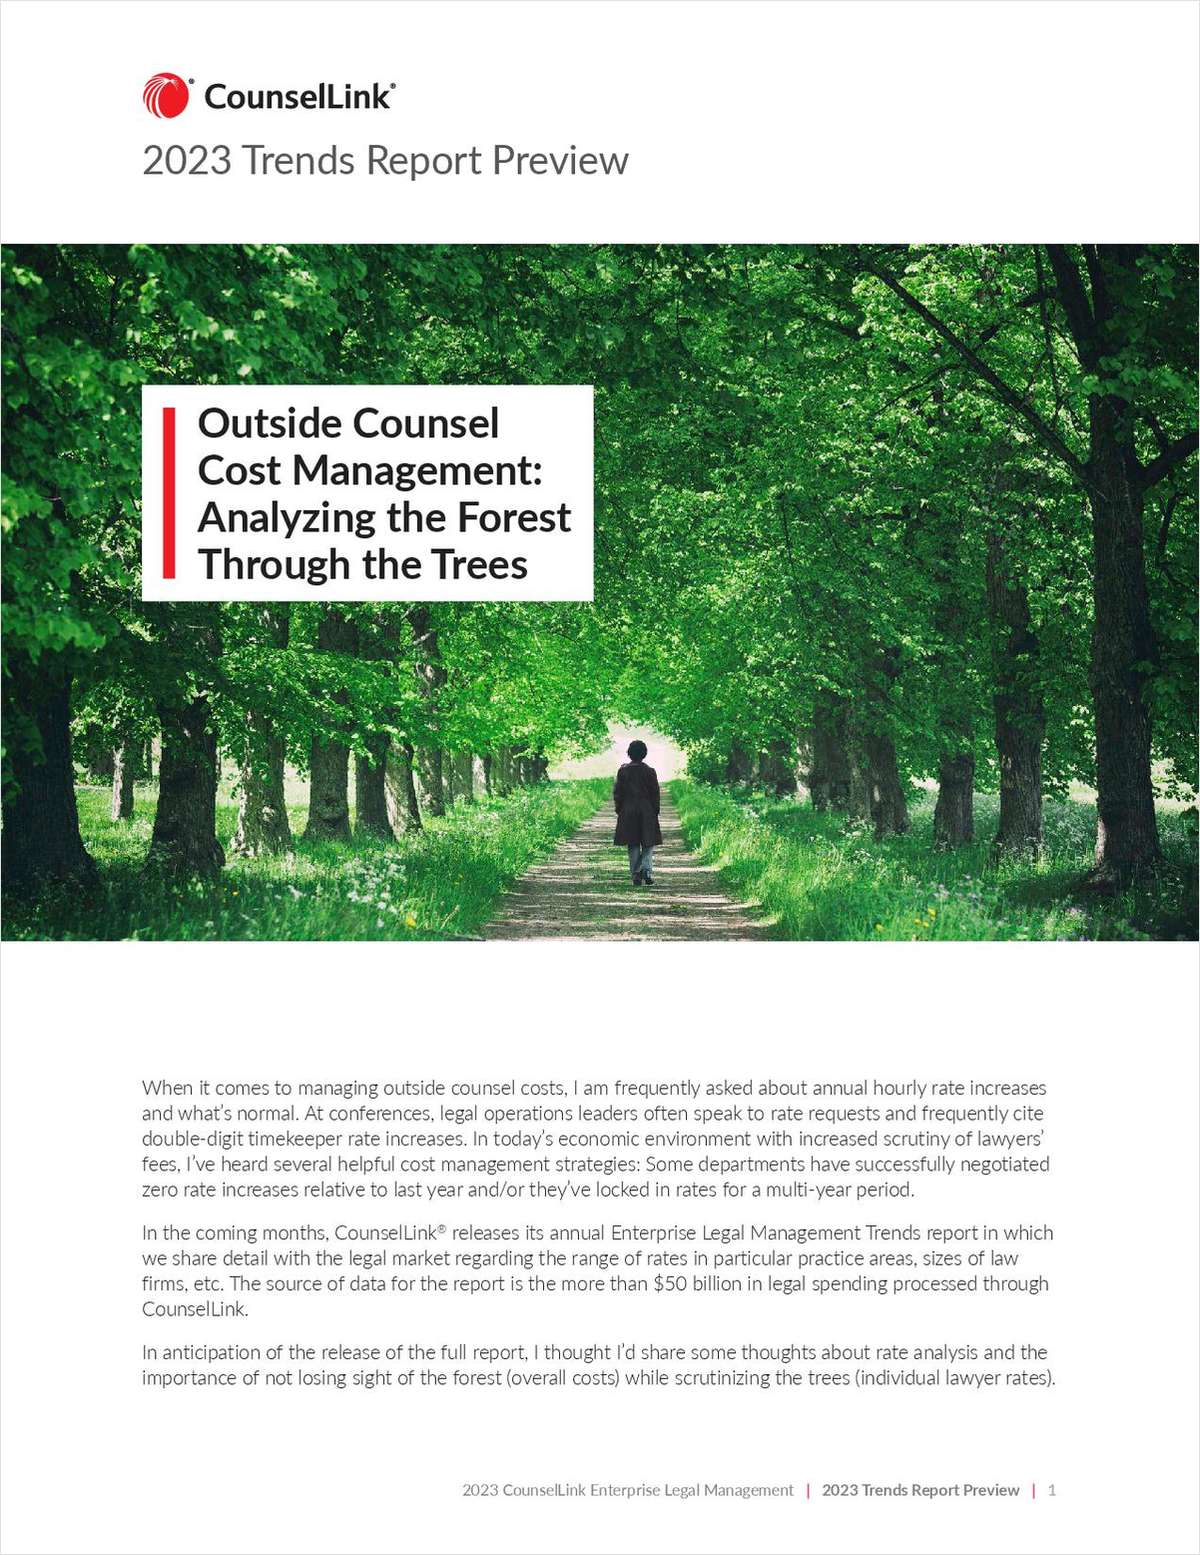 Dive into an advanced look at outside counsel billing rates, cost management strategies, and insights to come in the 9th Annual Enterprise Legal Management Trends Report based on data from more than $50 billion in legal spending processed through CounselLink.